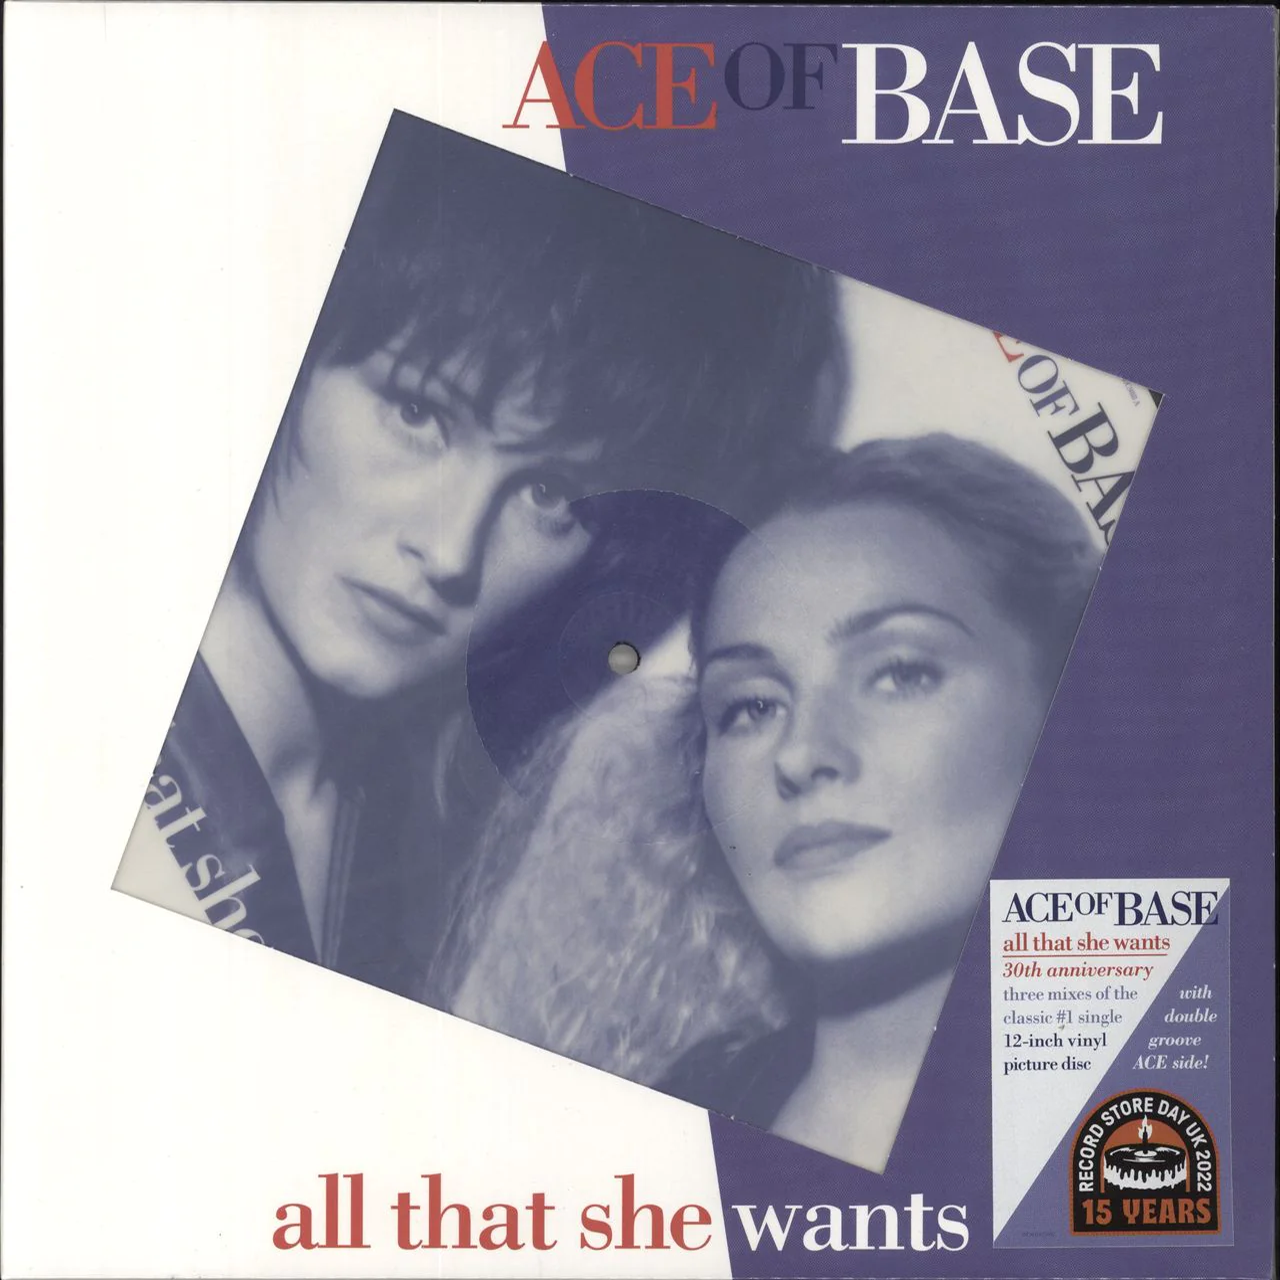 Ace of Base  - All That She Wants (30th Anniversary): Picture Disc Vinyl 12" Single